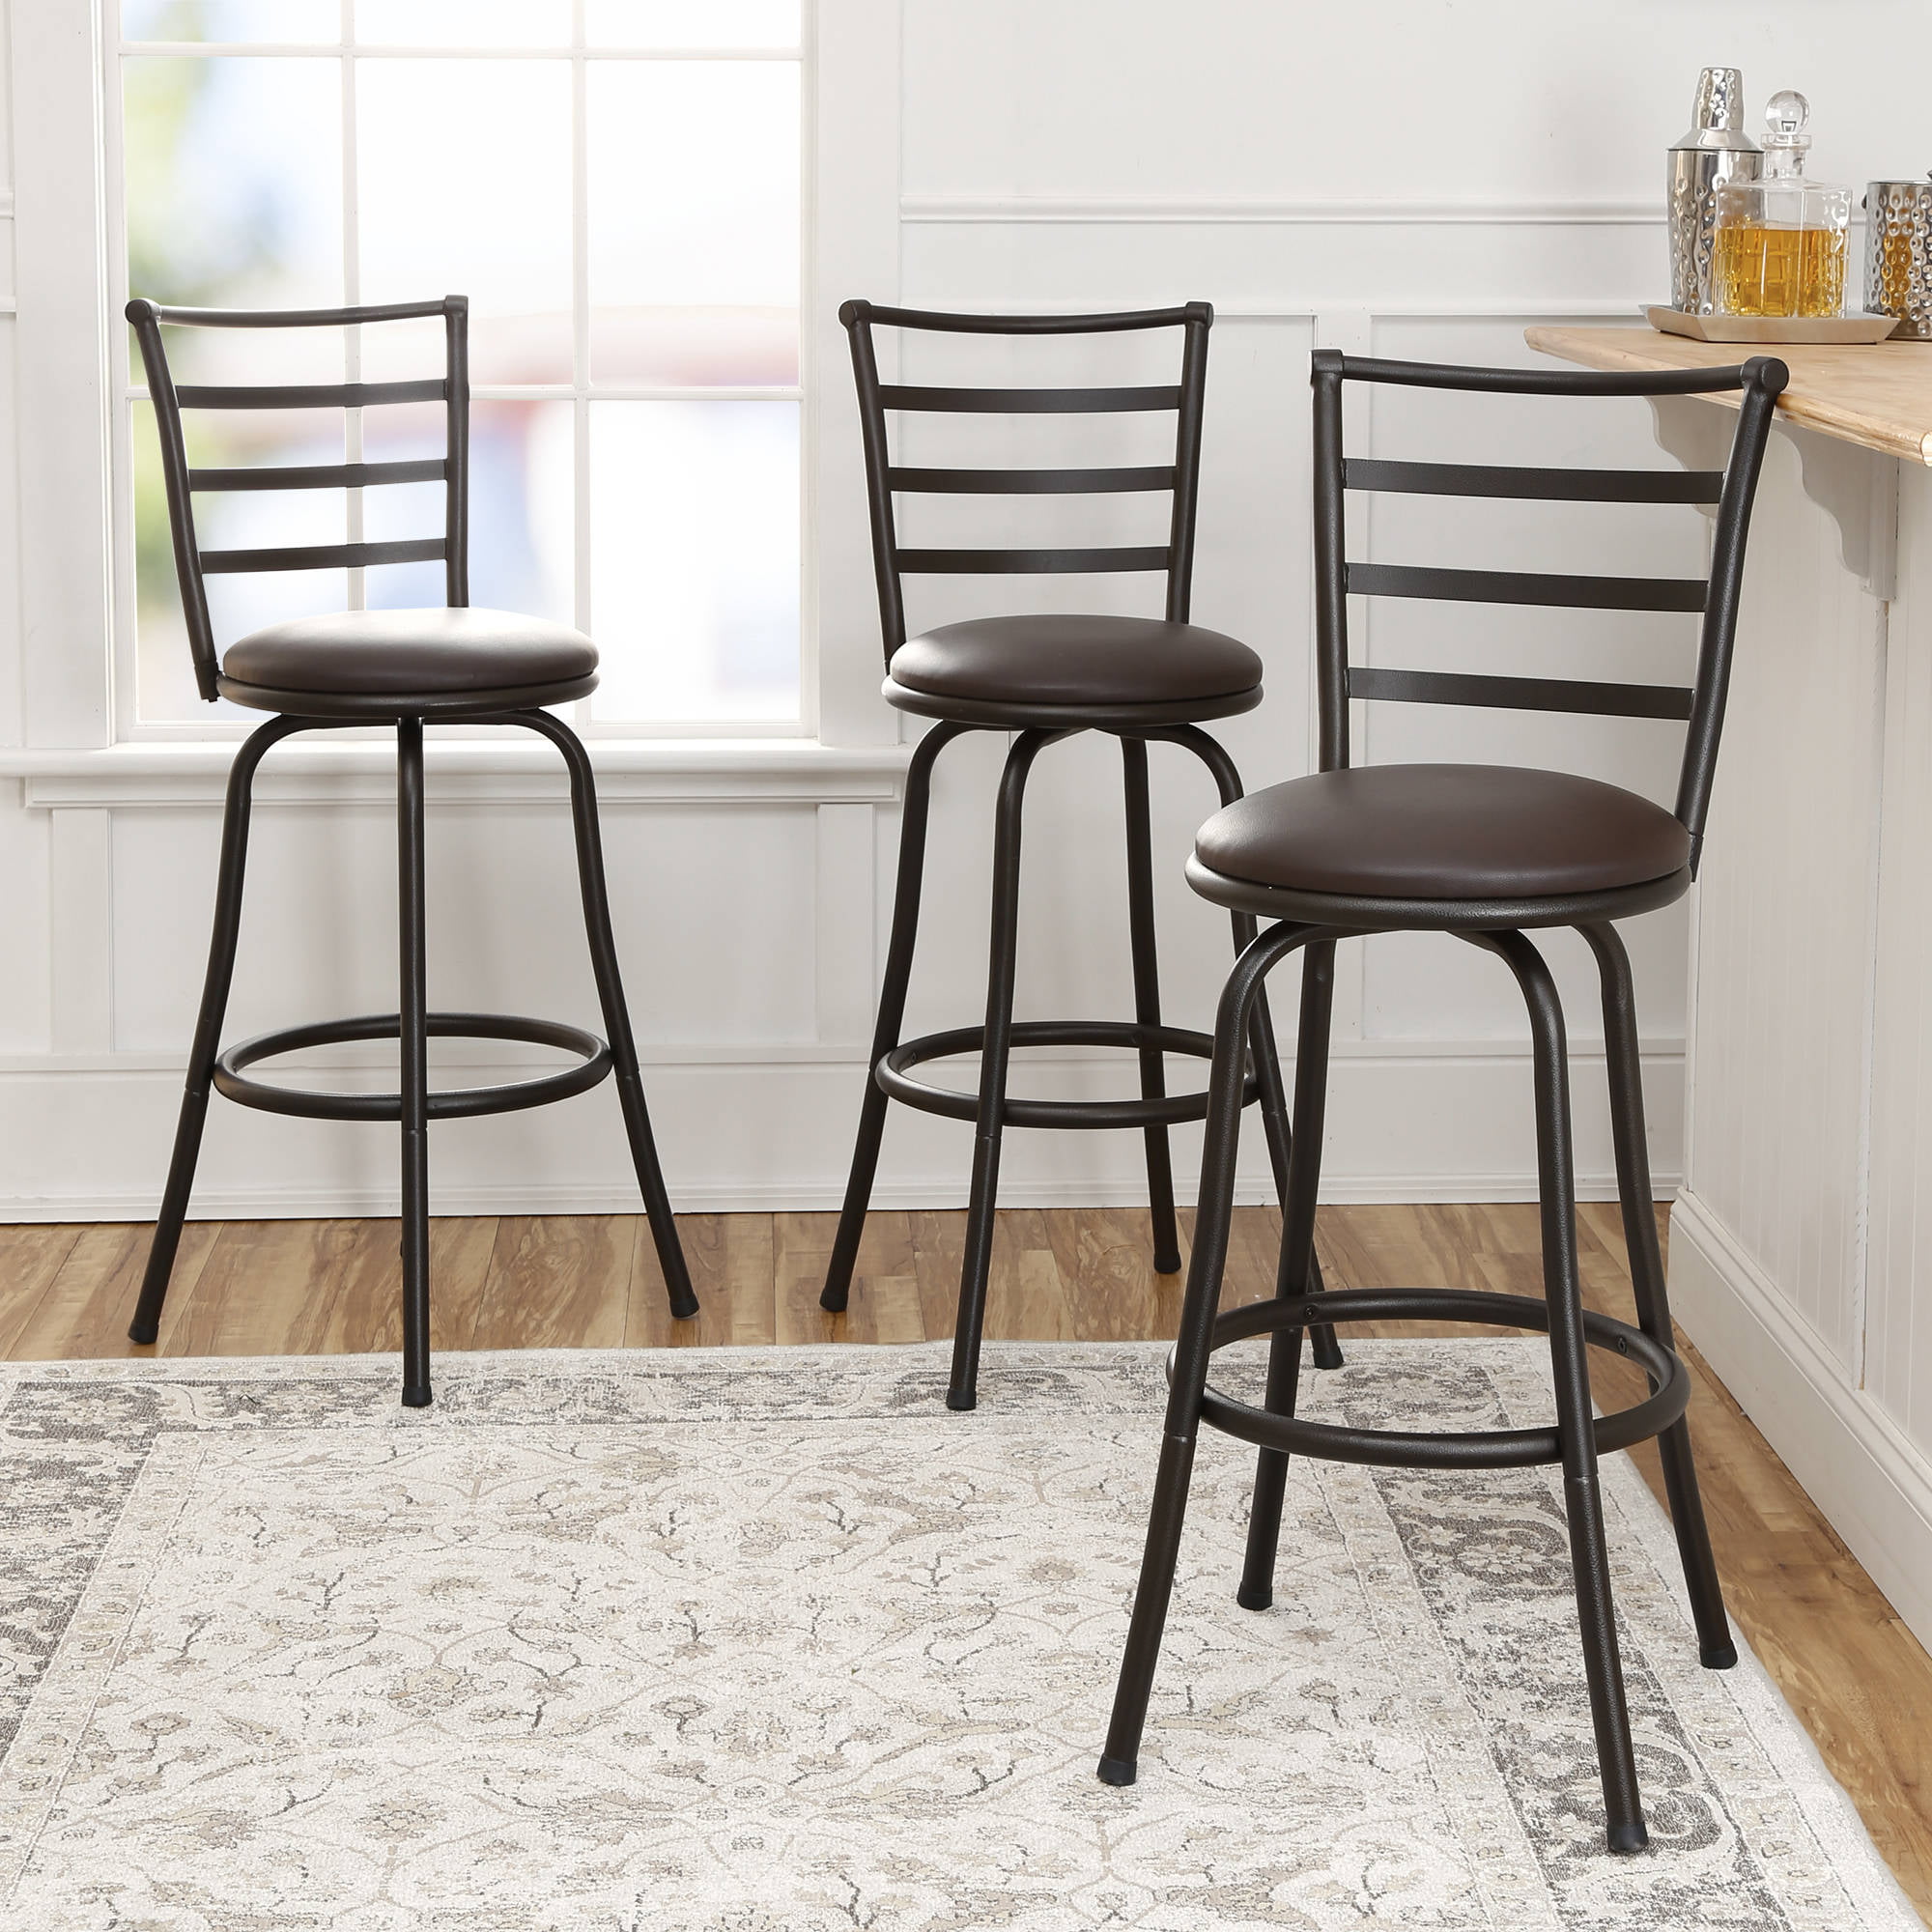 3-Count Mainstays Adjustable Swivel Barstools (Brown) $72 ($24 Each) + Free Shipping